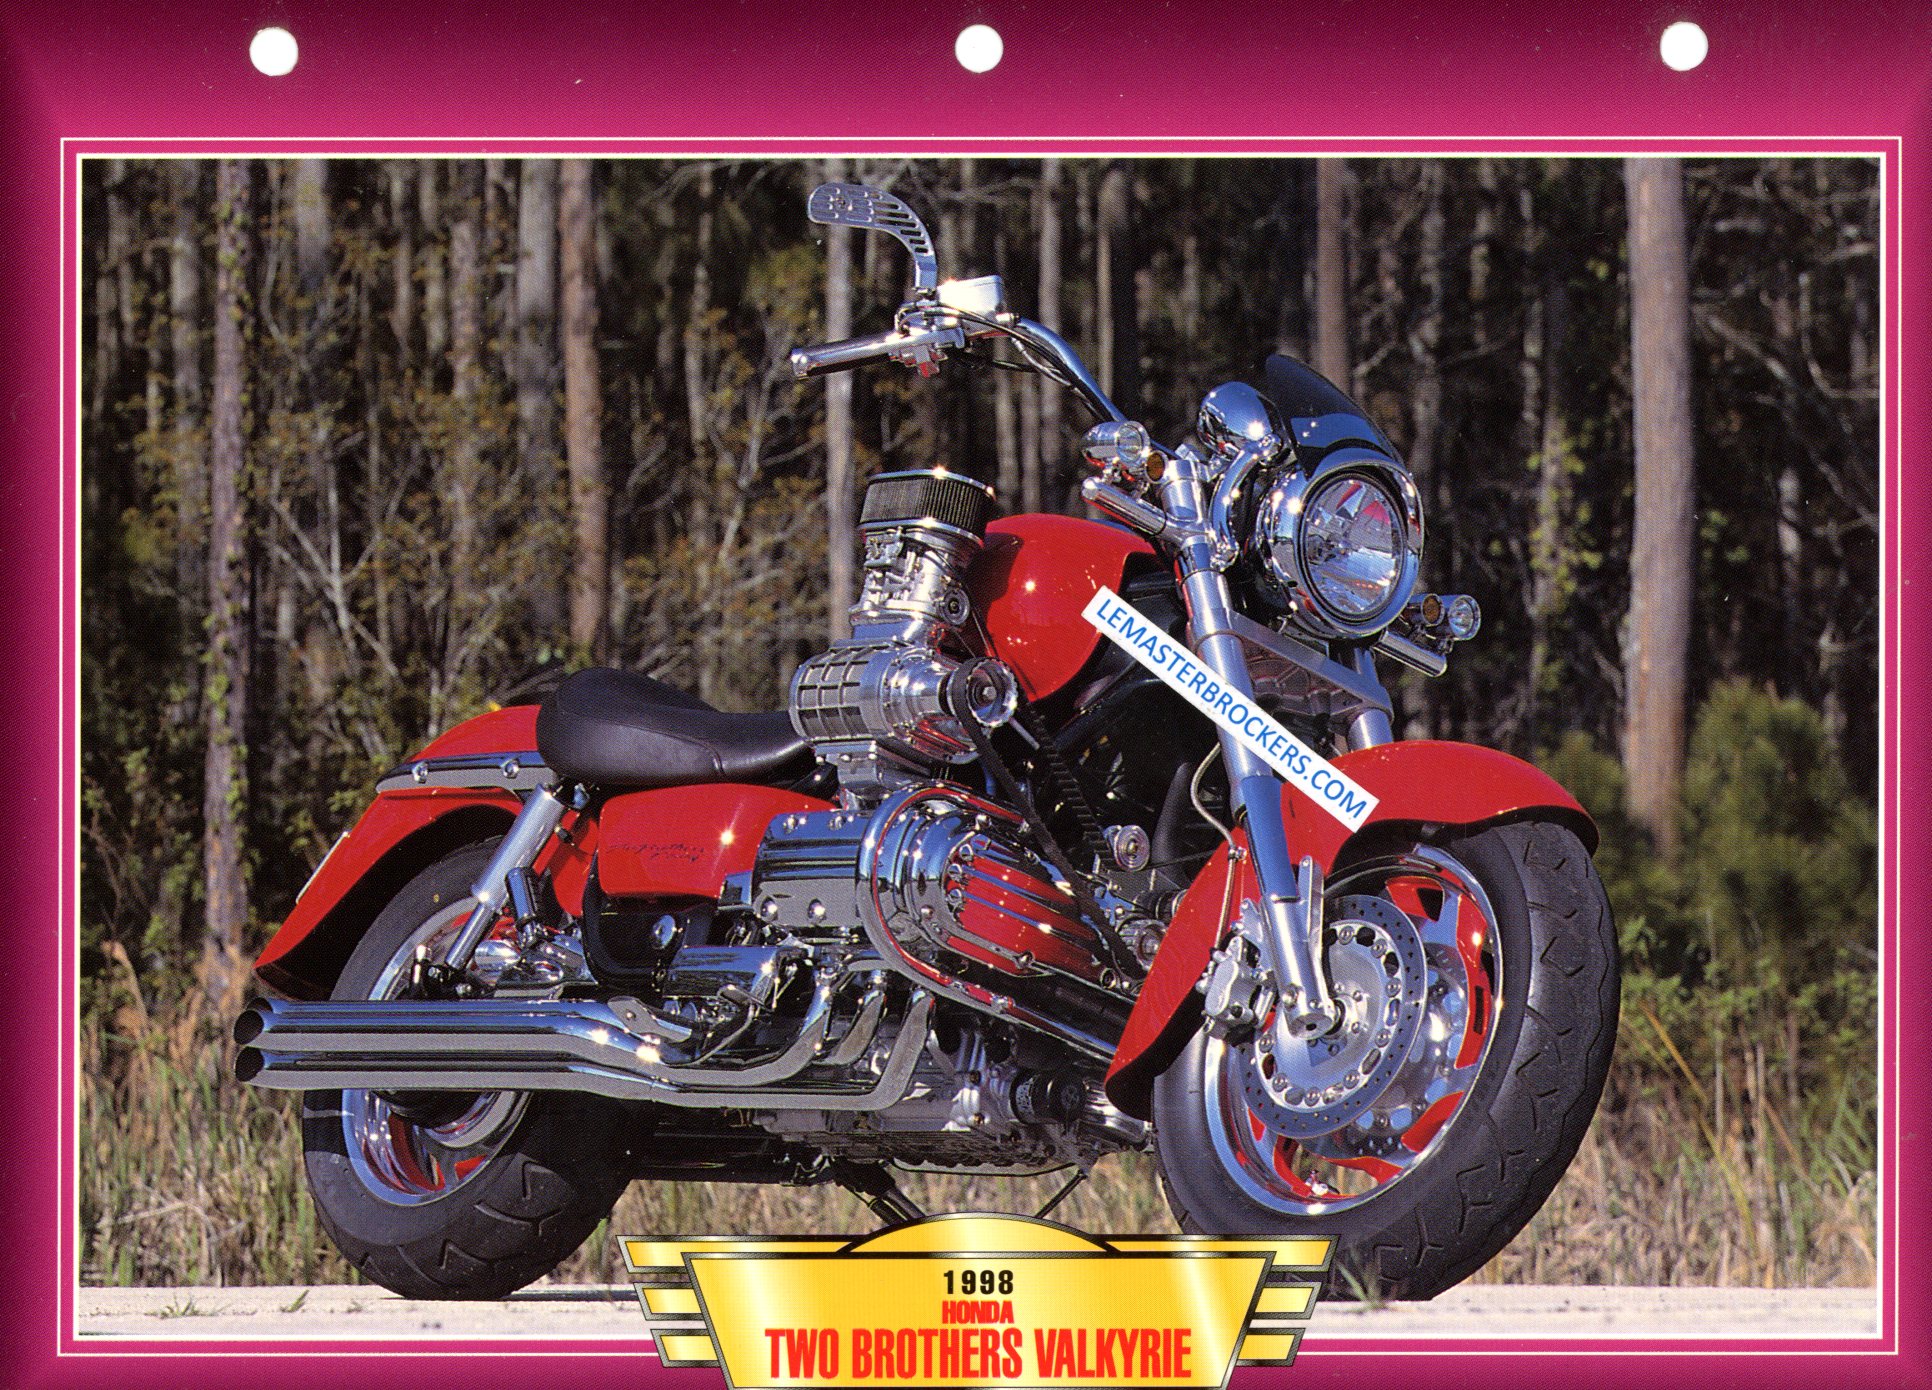 FICHE MOTO HONDA TWO BROTHERS VALKYRIE 1998